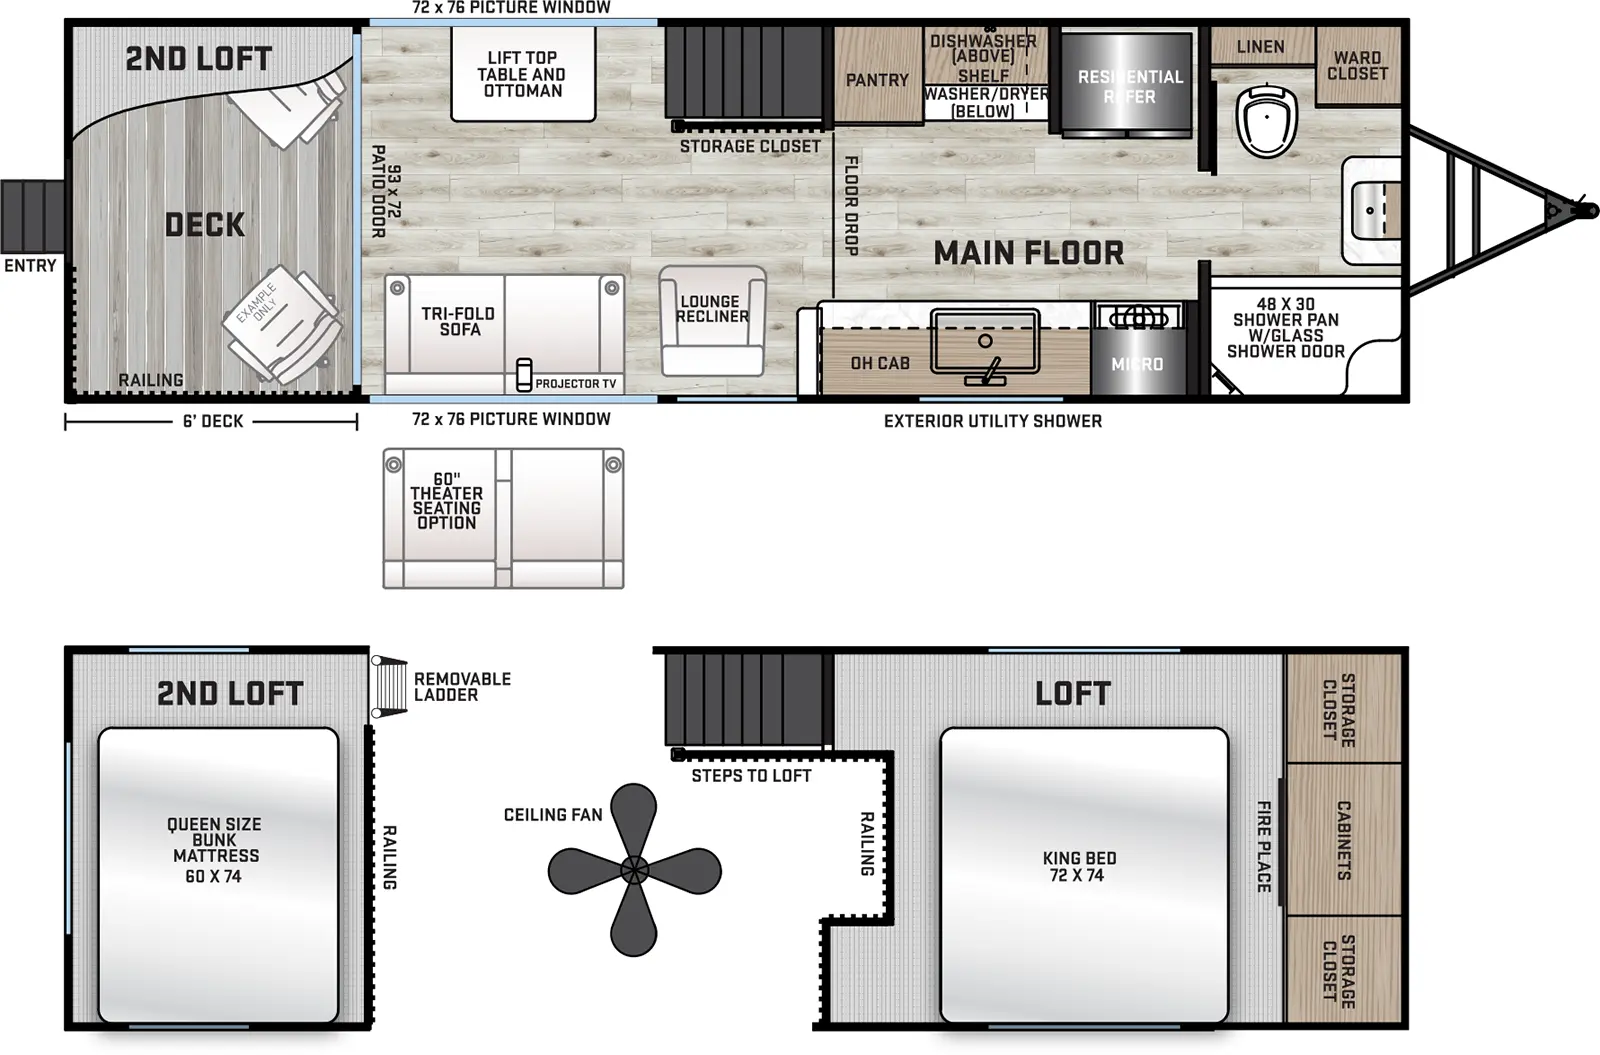 The 18RDL has zero slideouts and one entry. Exterior features a 6 foot deck. Interior layout front to back: Full bathroom with linen closet, wardrobe closet, and shower with glass shower door; off-door side residential refrigerator, dishwasher above shelf and washer/dryer, and pantry; door side microwave, cooktop, kitchen counter with sink, and overhead cabinet; off-door side storage closet and steps up to a rear loft area with king bed, cabinets, closets, and fireplace; door side lounge recliner, tri-fold sofa, opposing picture windows, projector TV, ceiling fan, and off-door side lift top table and ottoman; rear patio door that leads to deck with loft above with removeable ladder and queen bunk mattress.